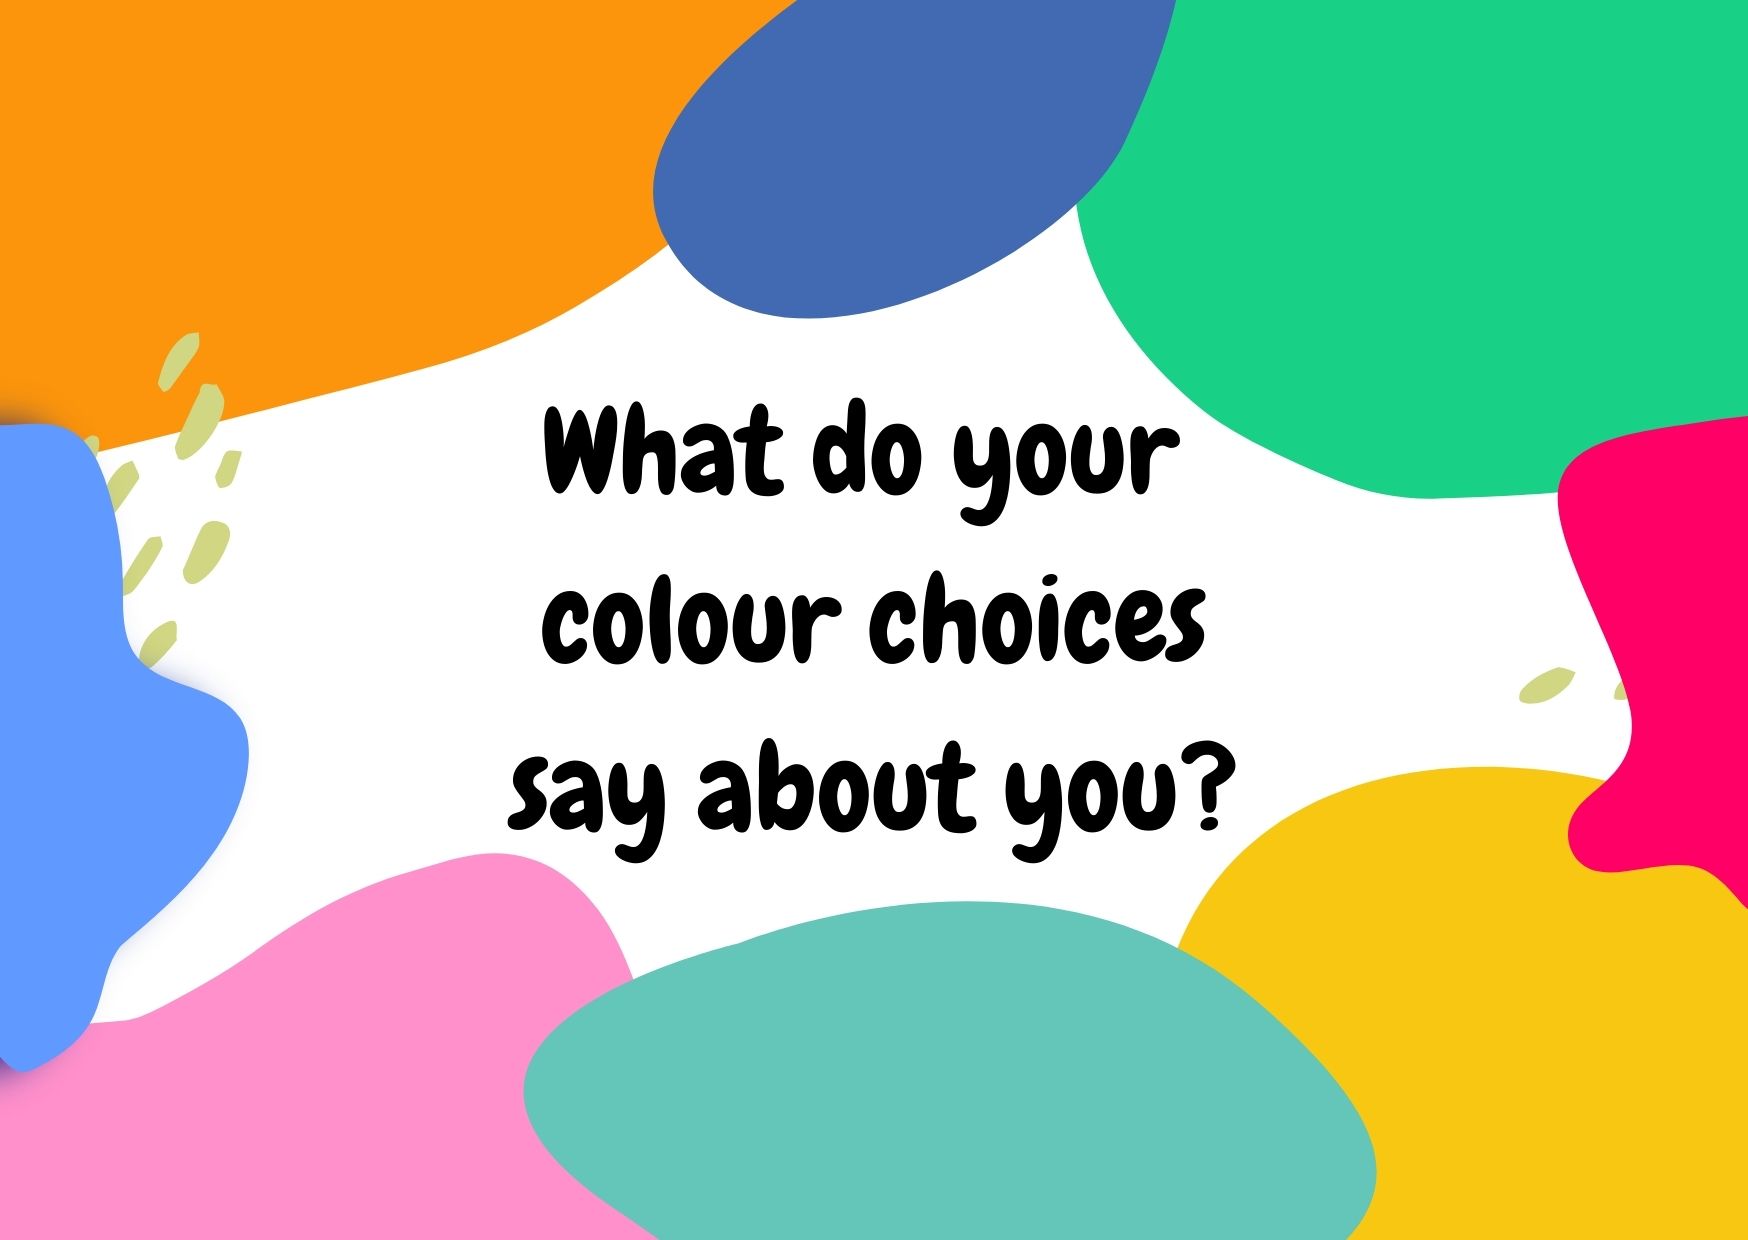 What your colour choices say about you